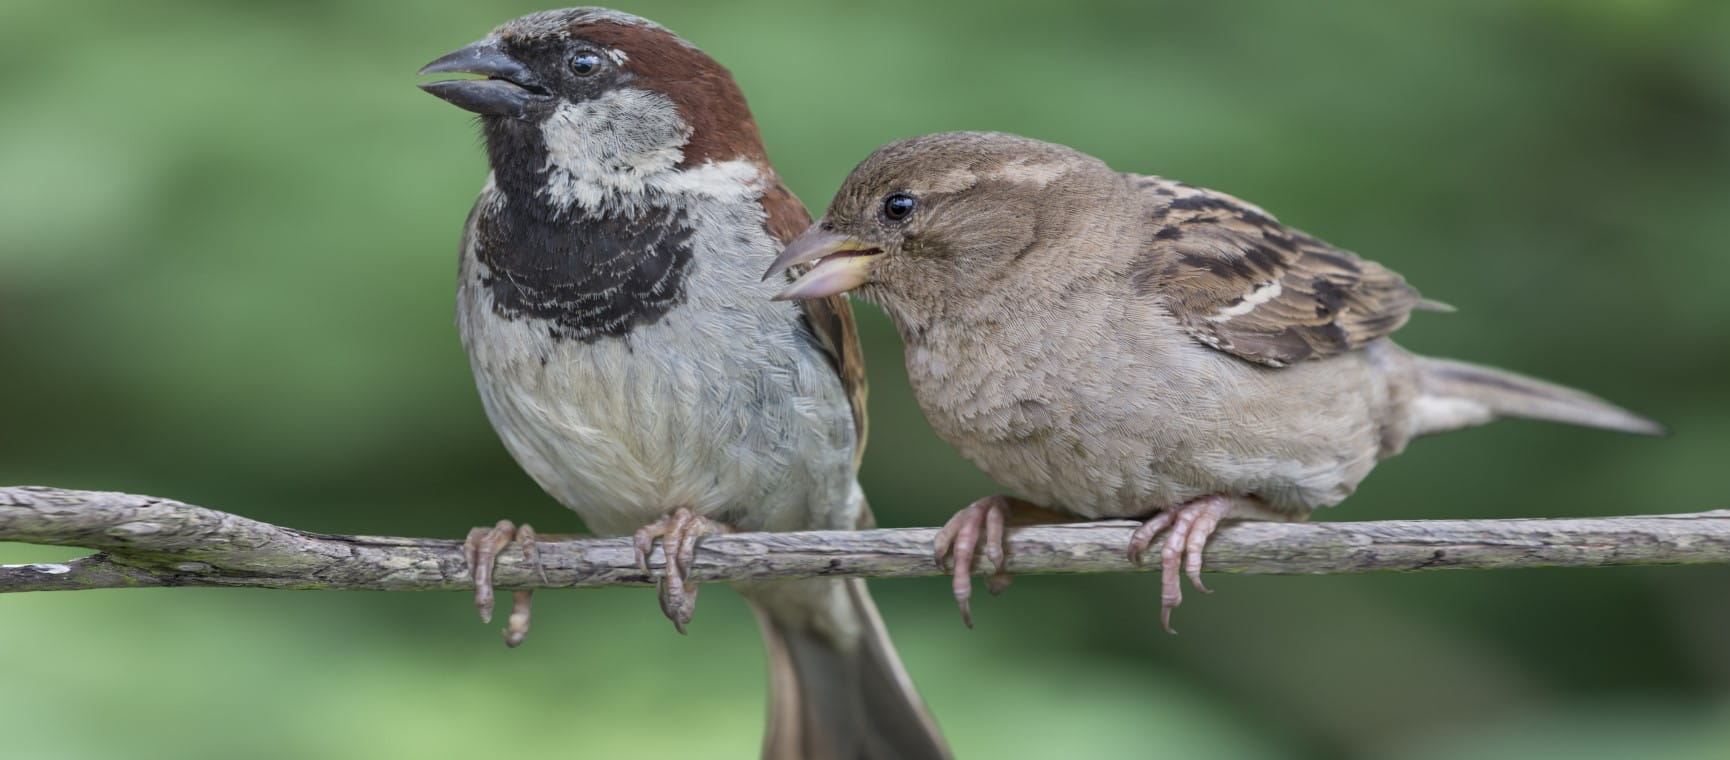 Male and female house sparrows perched on a branch | Getty/PaulFleet